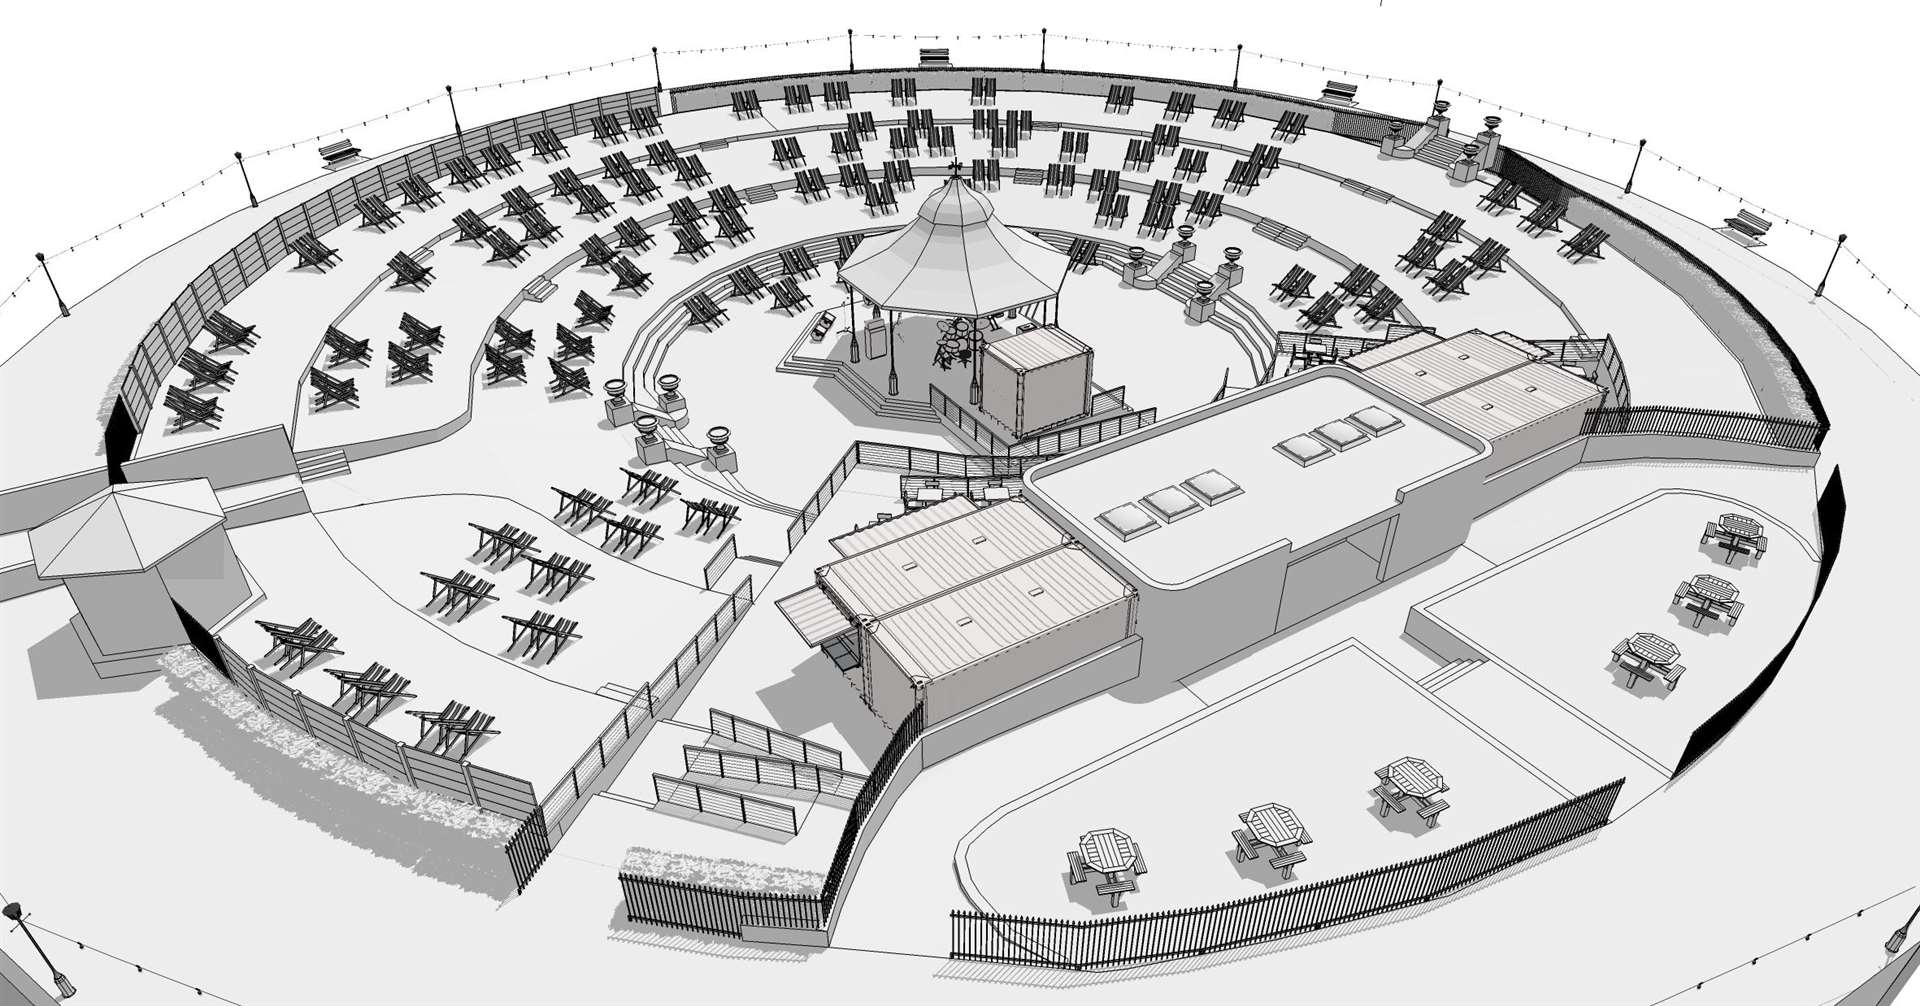 GRASS Cliftonville's vision for the bandstand and lawns